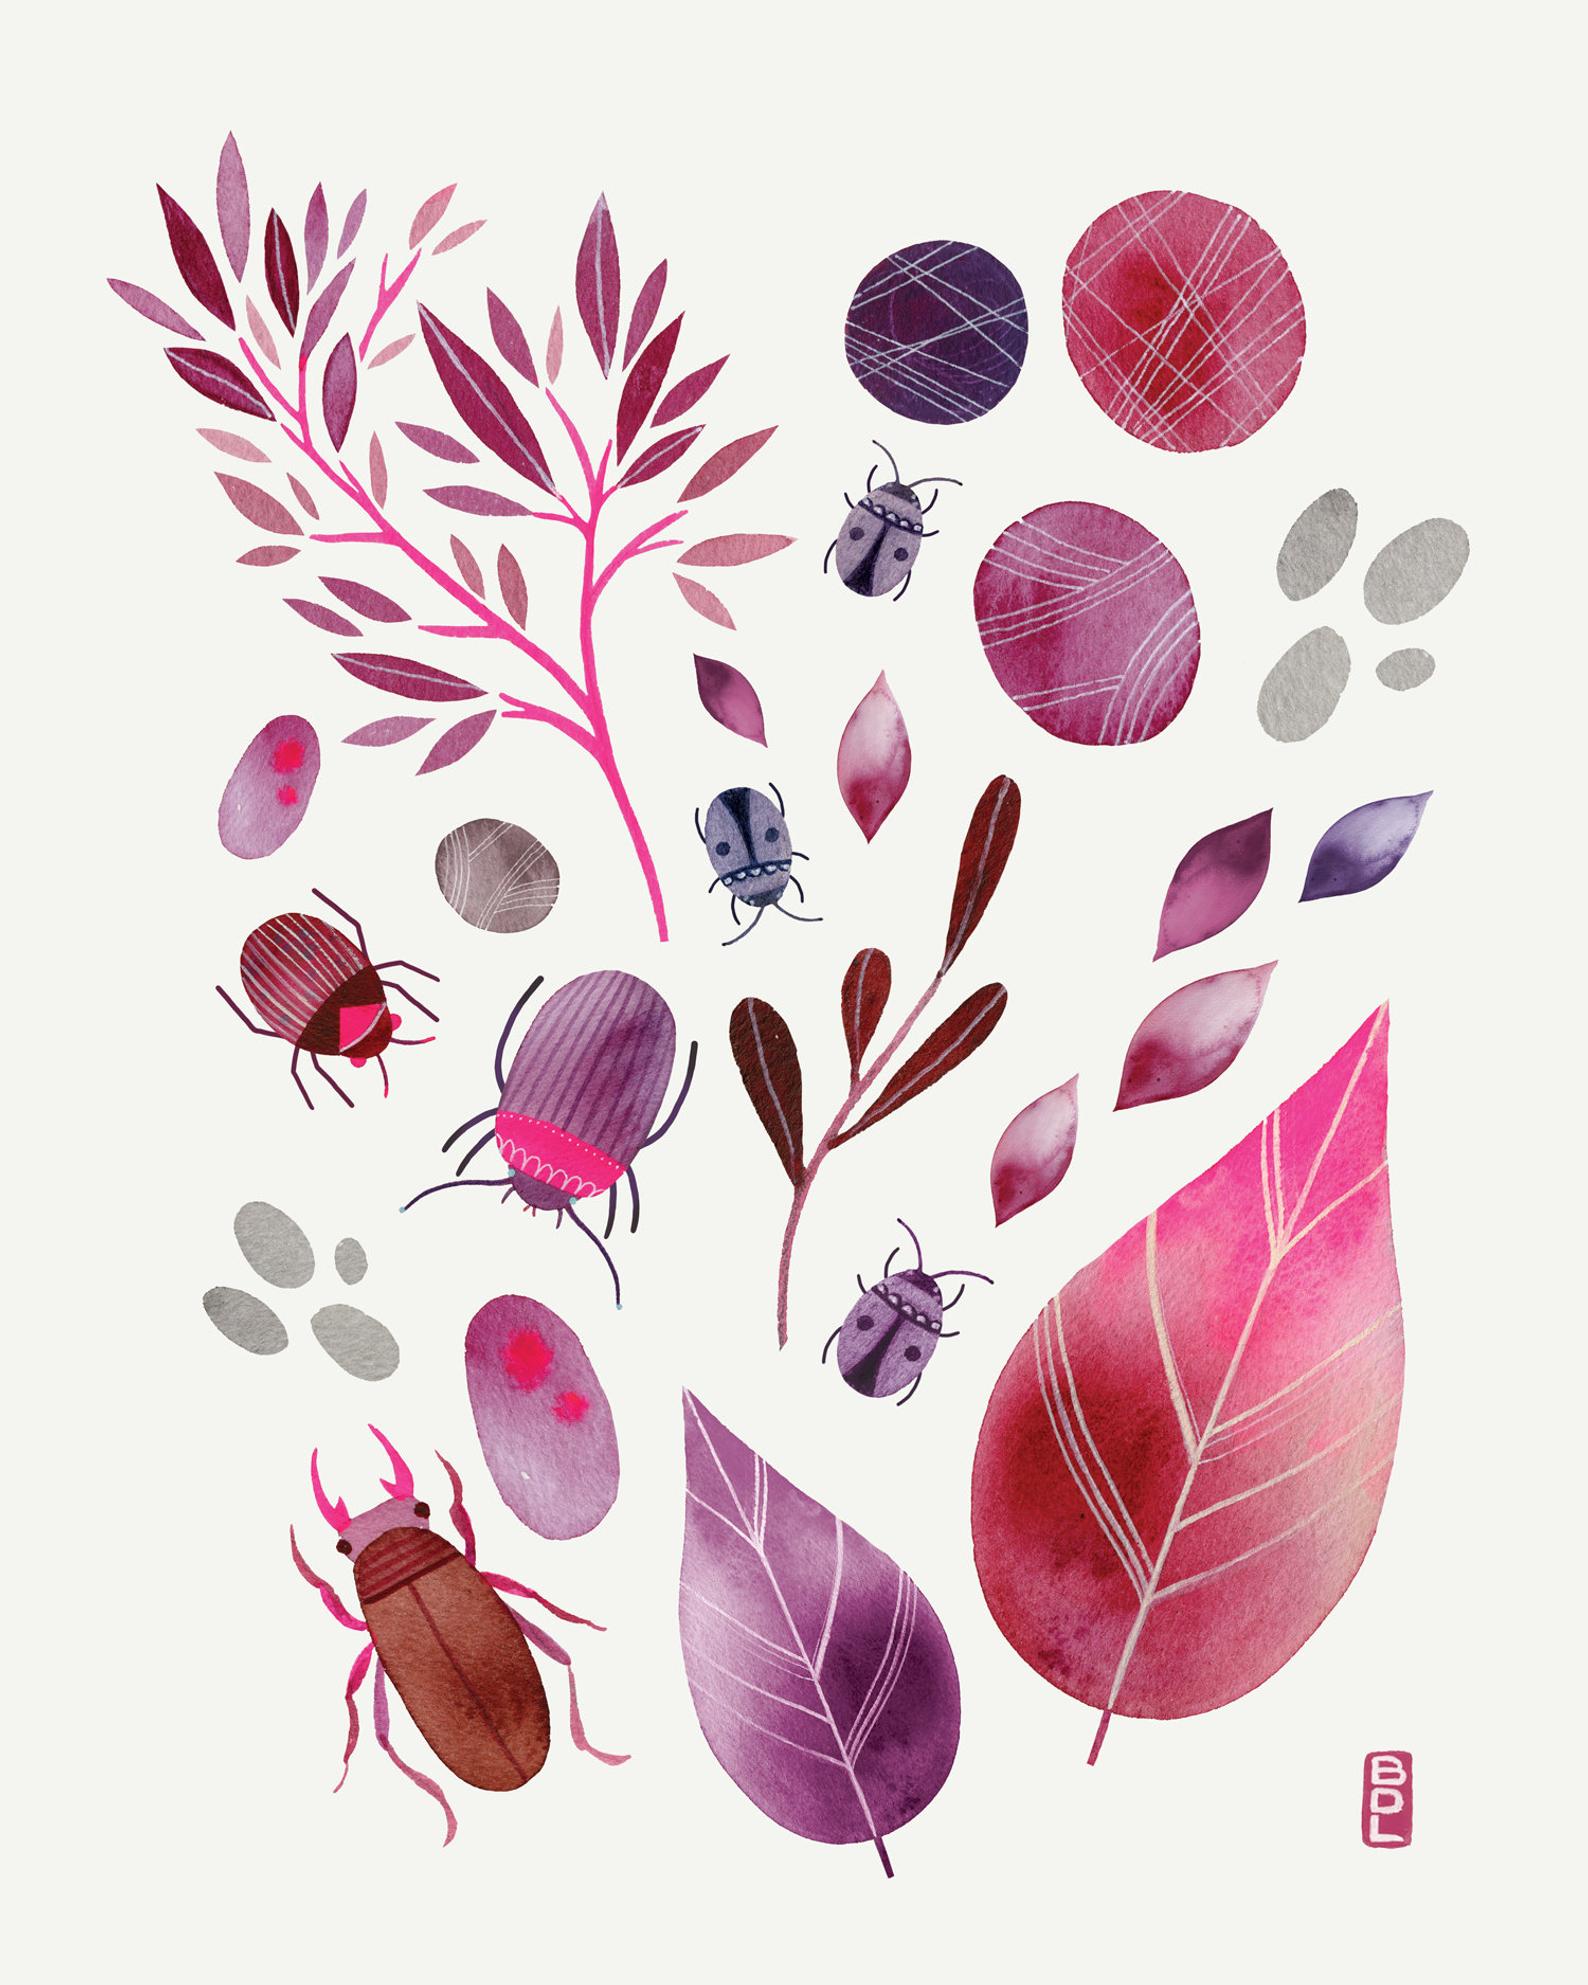 One of DeMaris's illustrations featuring various leaves and beetles in pink and purple hues